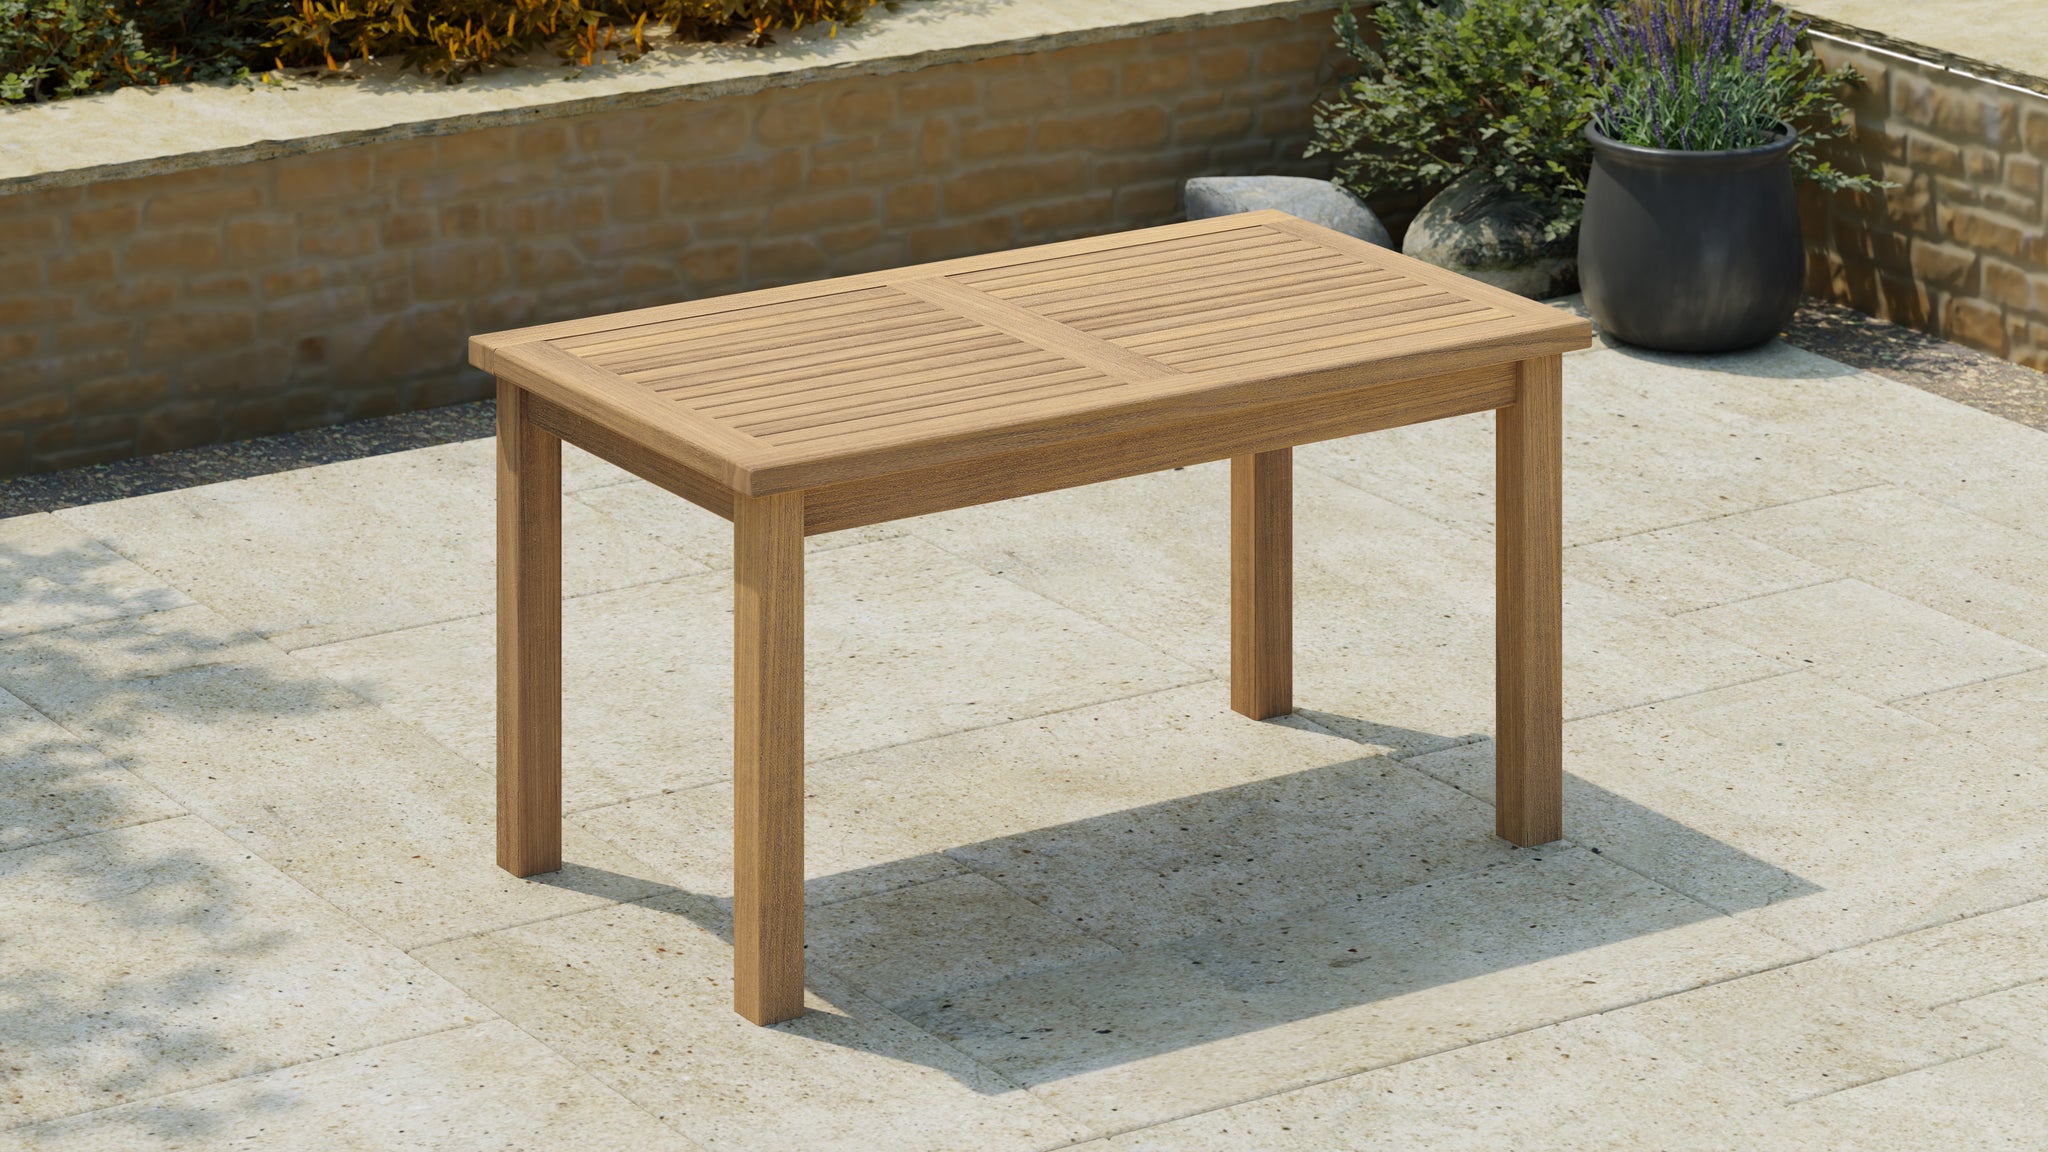 80x140cm Fixed Rectangular Table without Parasol Hole